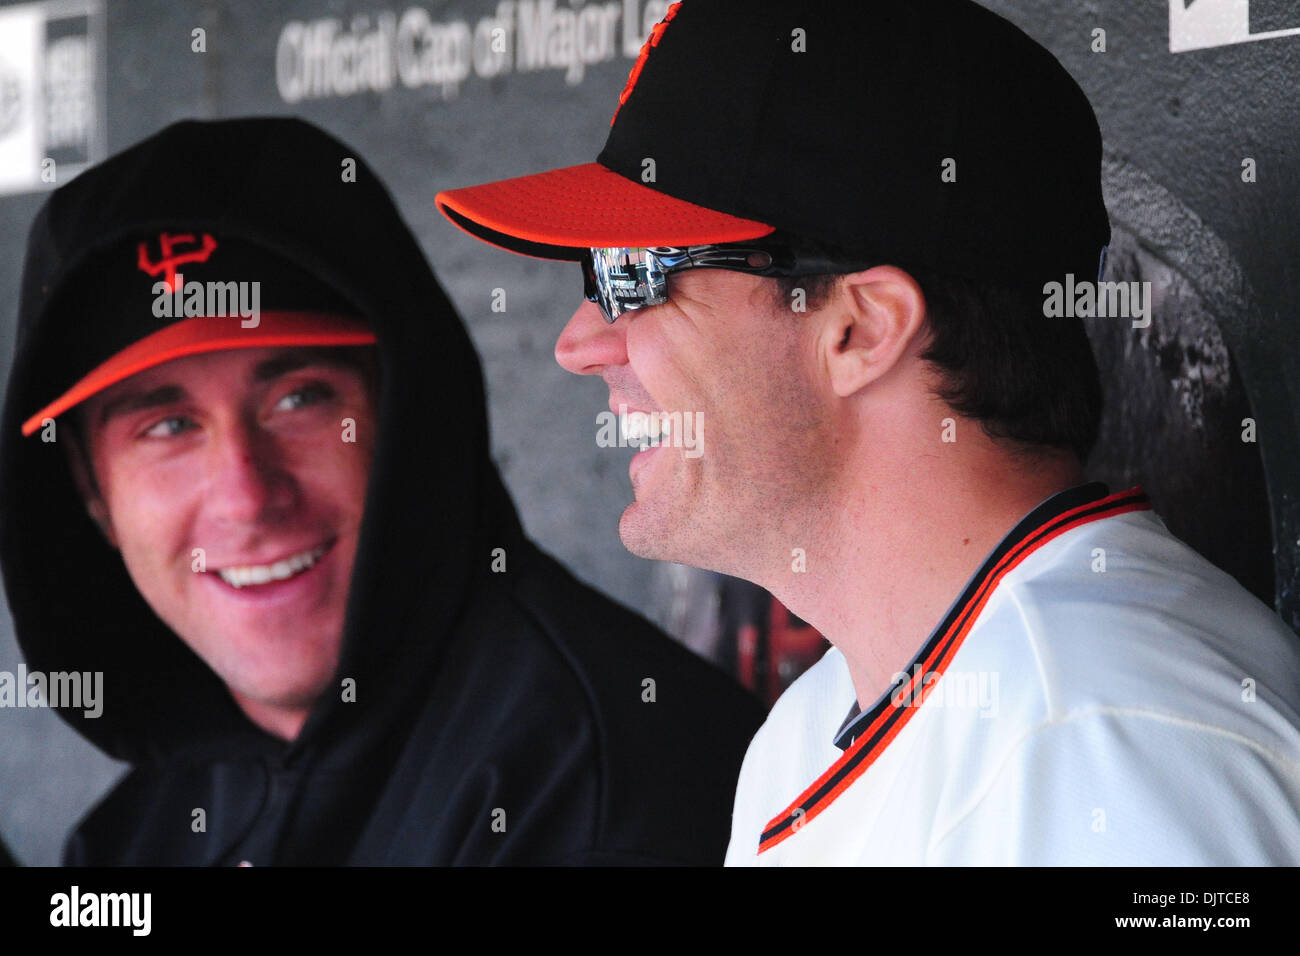 San Francisco, CA: San Francisco Giants' pitcher Barry Zito (75) having some fun in the dugout. The Rockies won the game 4-1. (Credit Image: © Charles Herskowitz/Southcreek Global/ZUMApress.com) Stock Photo